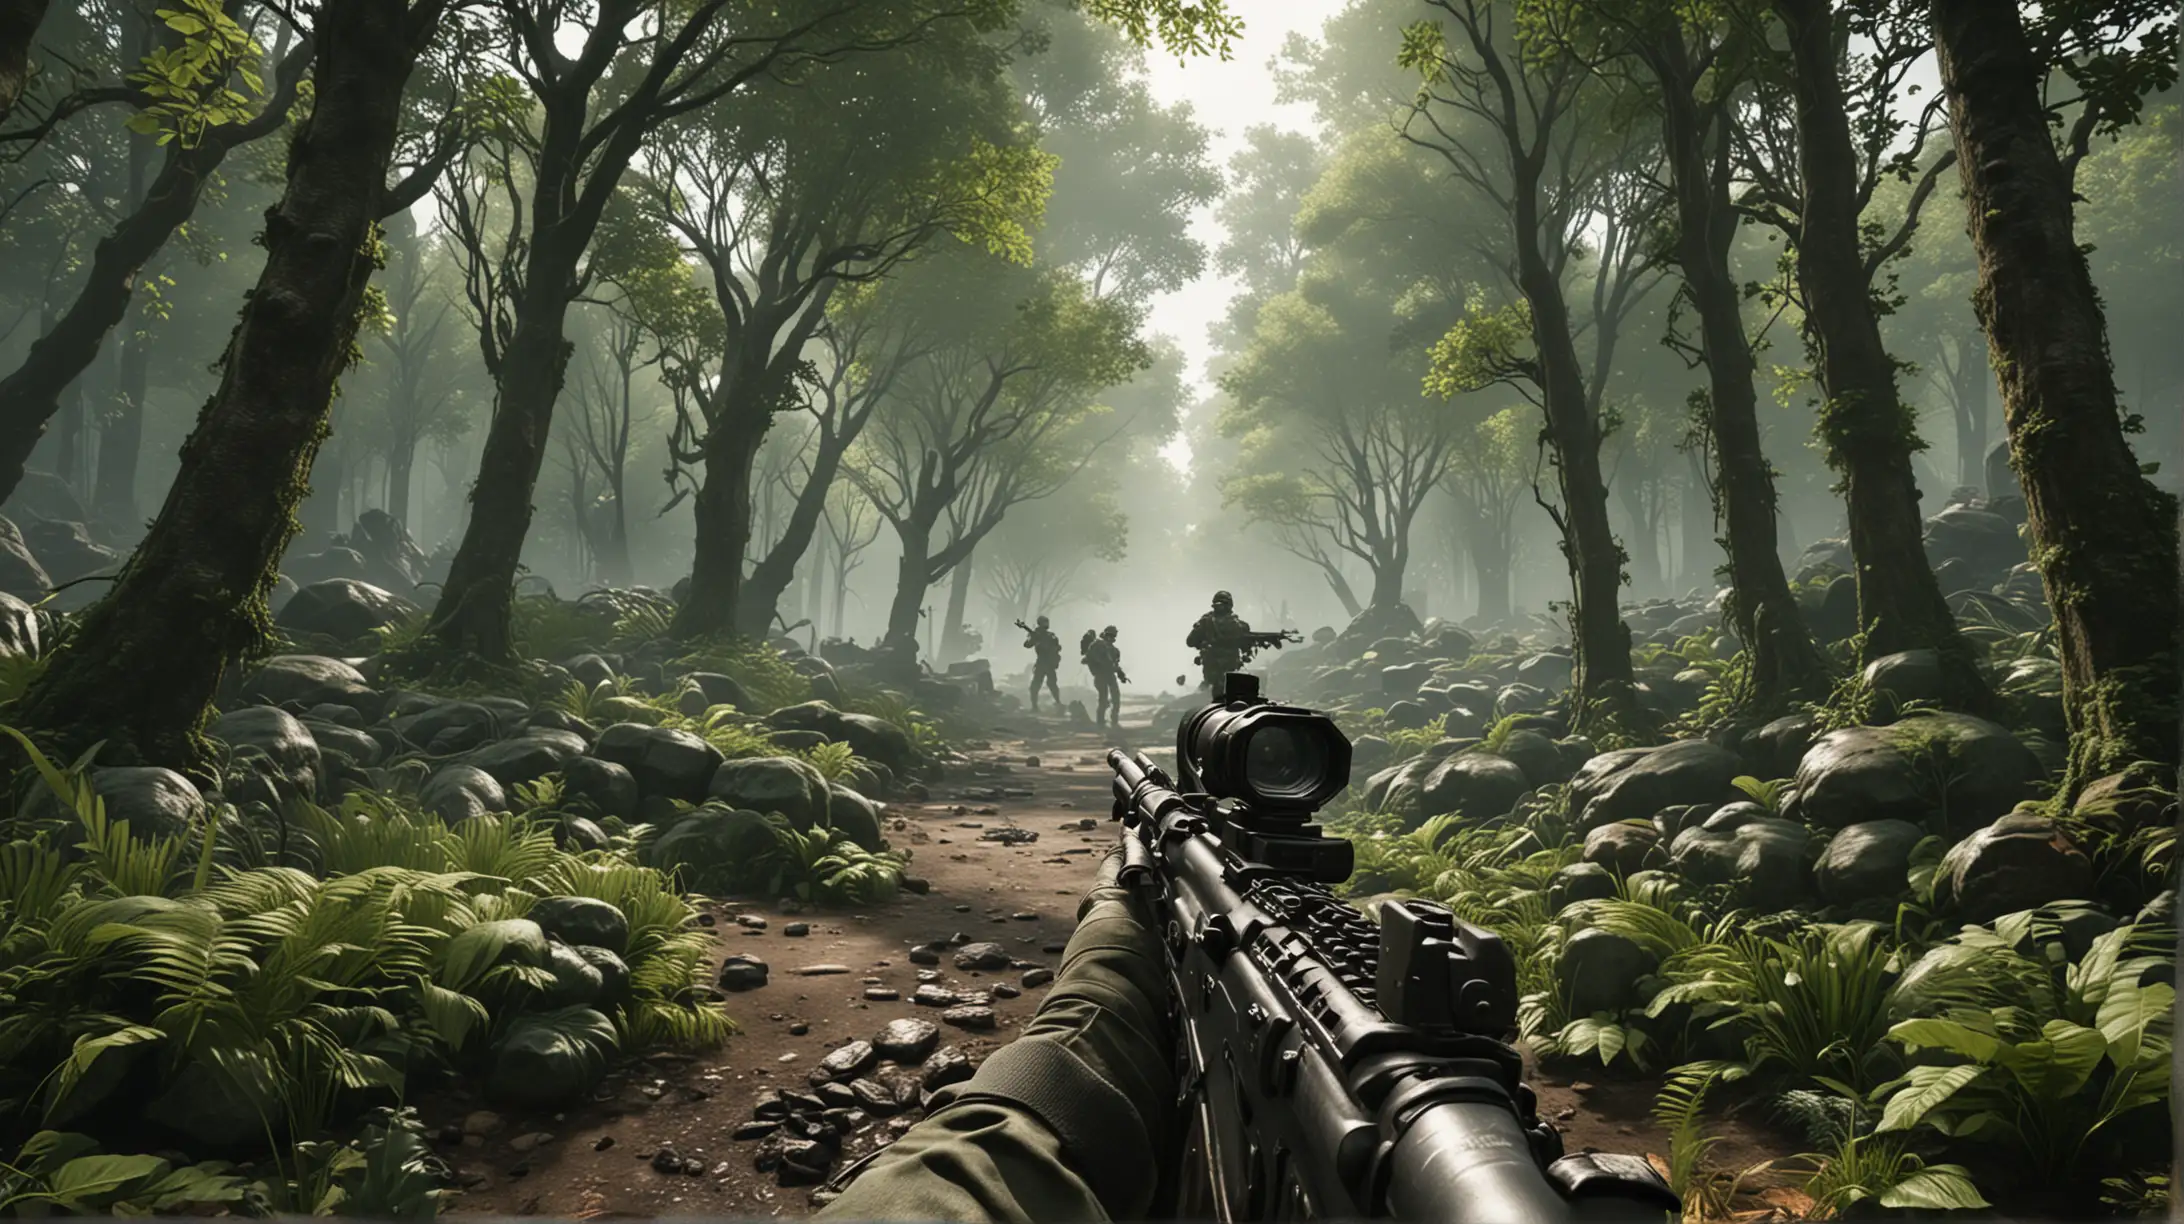 Soldier Shooting at Ghost in Lush Green Forest 4K Hyperrealistic Image